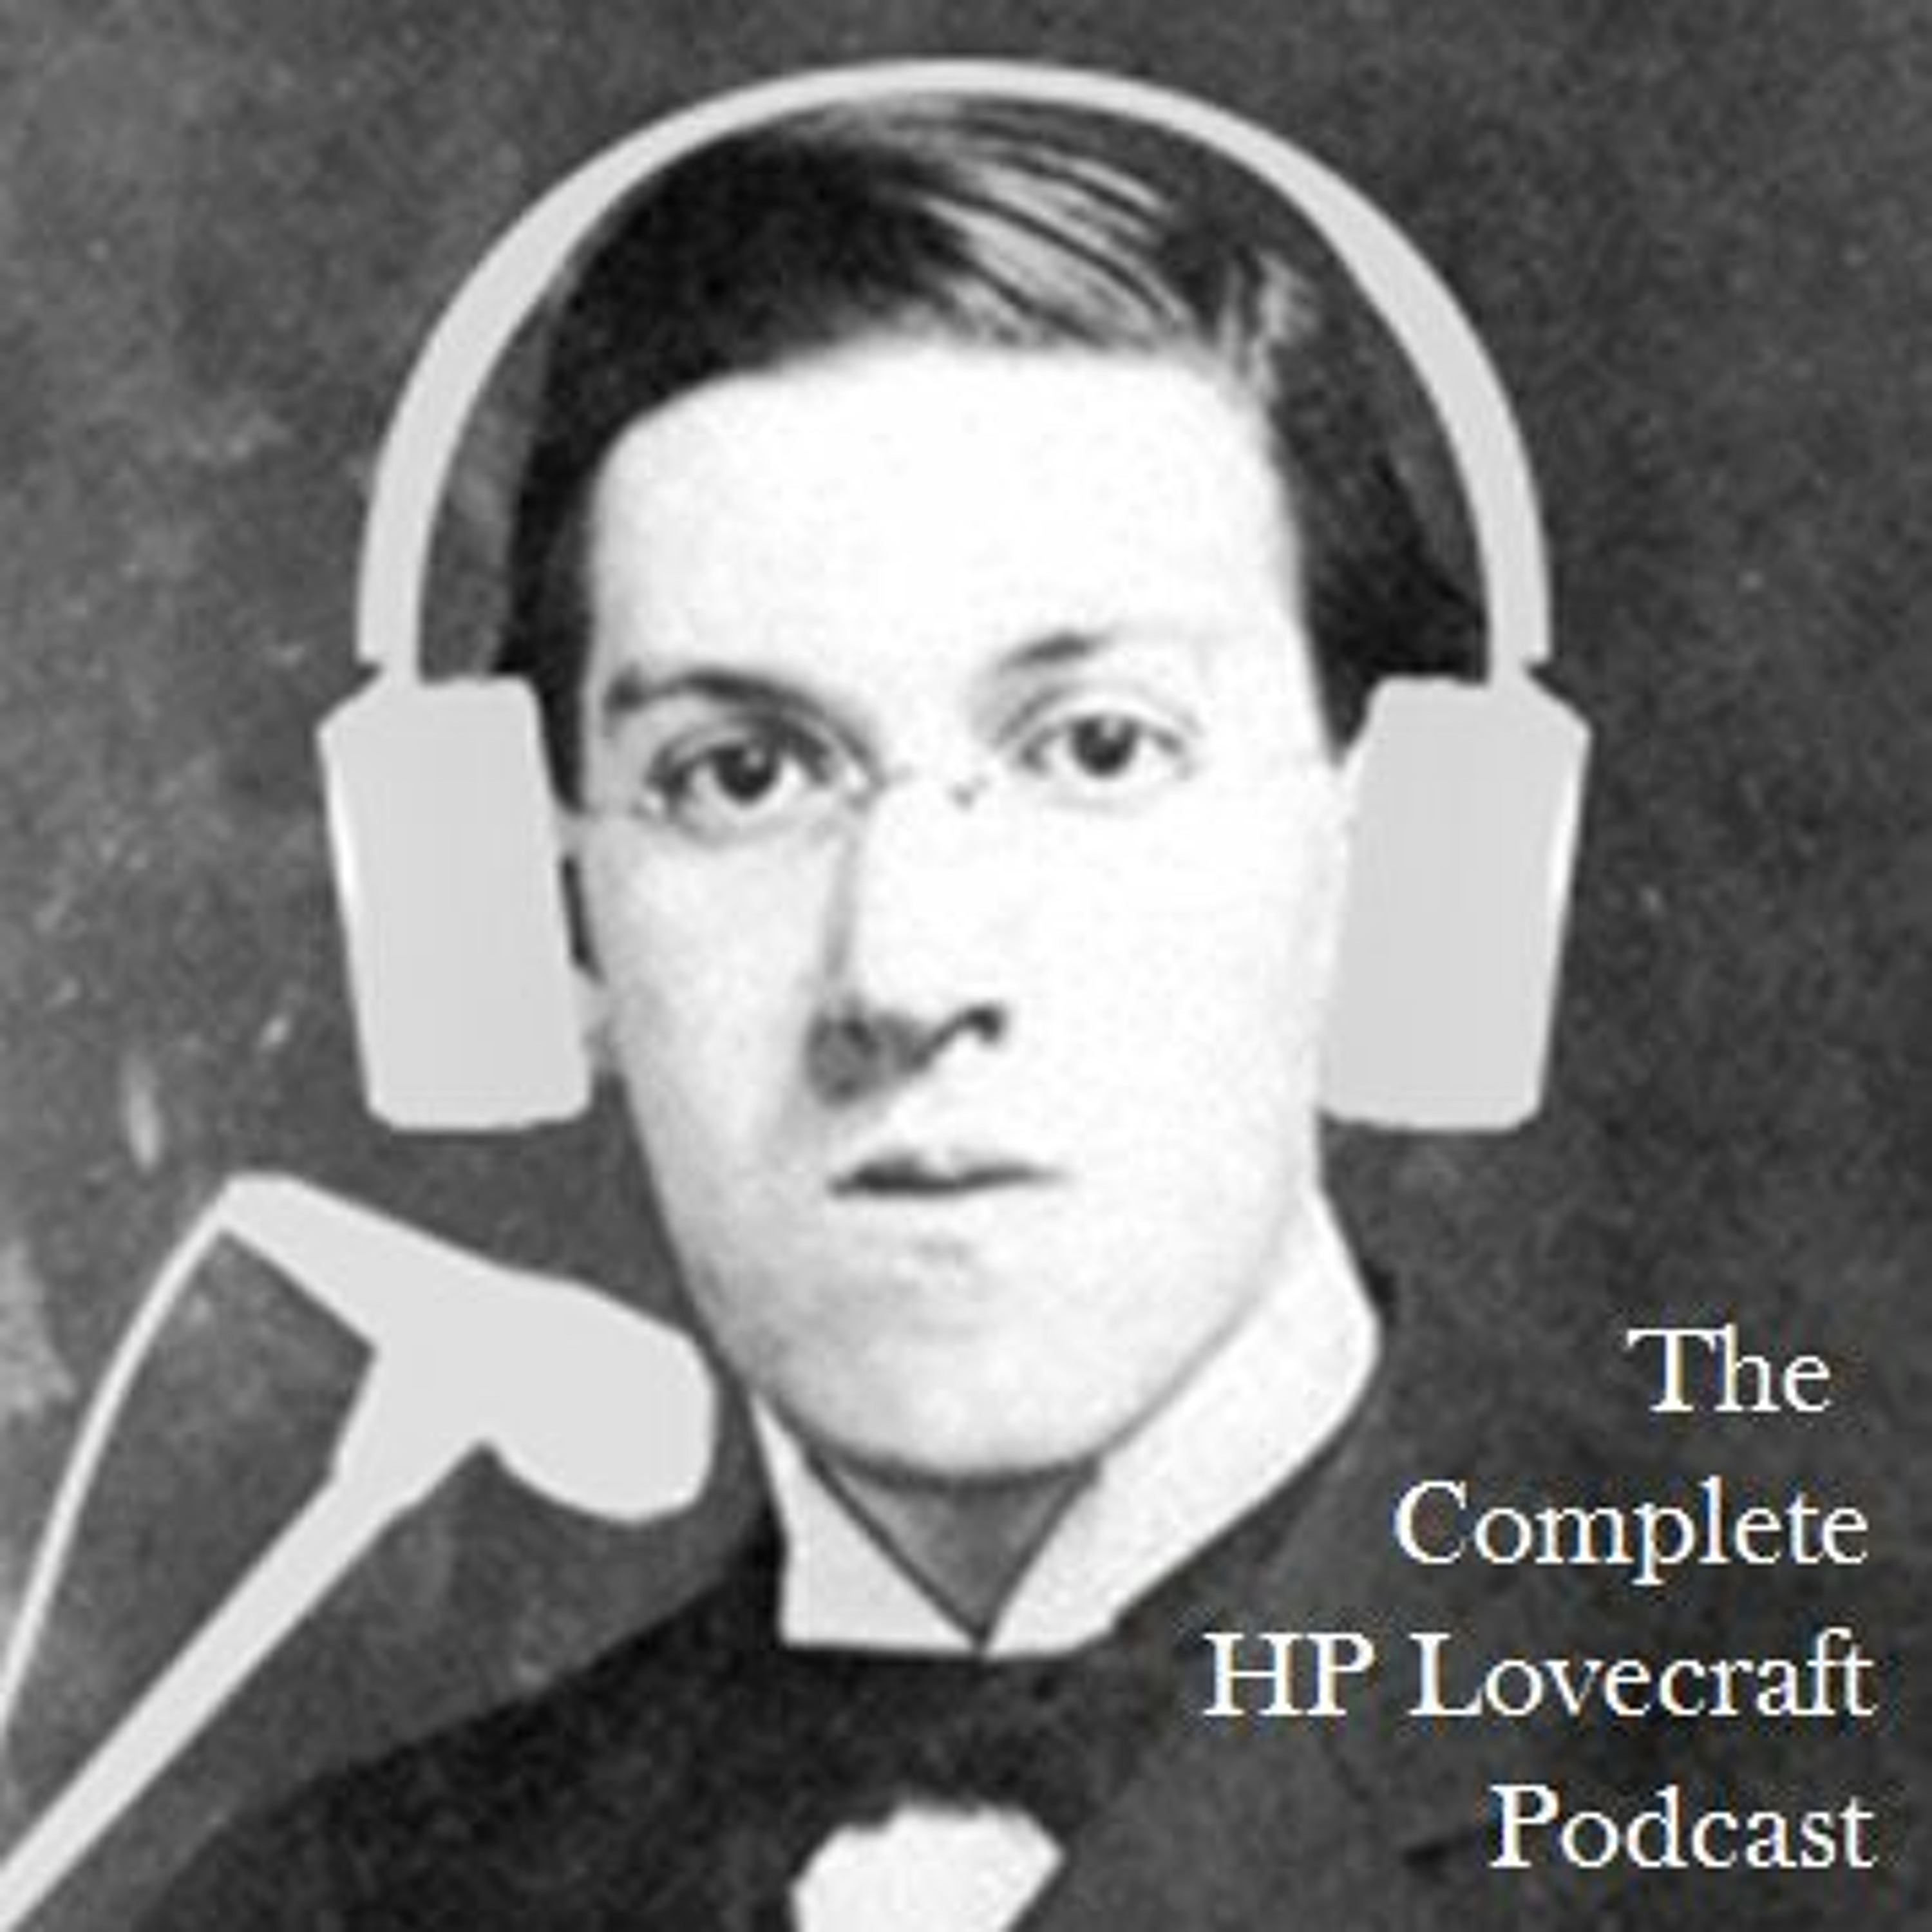 The Temple - The Complete HP Lovecraft Podcast